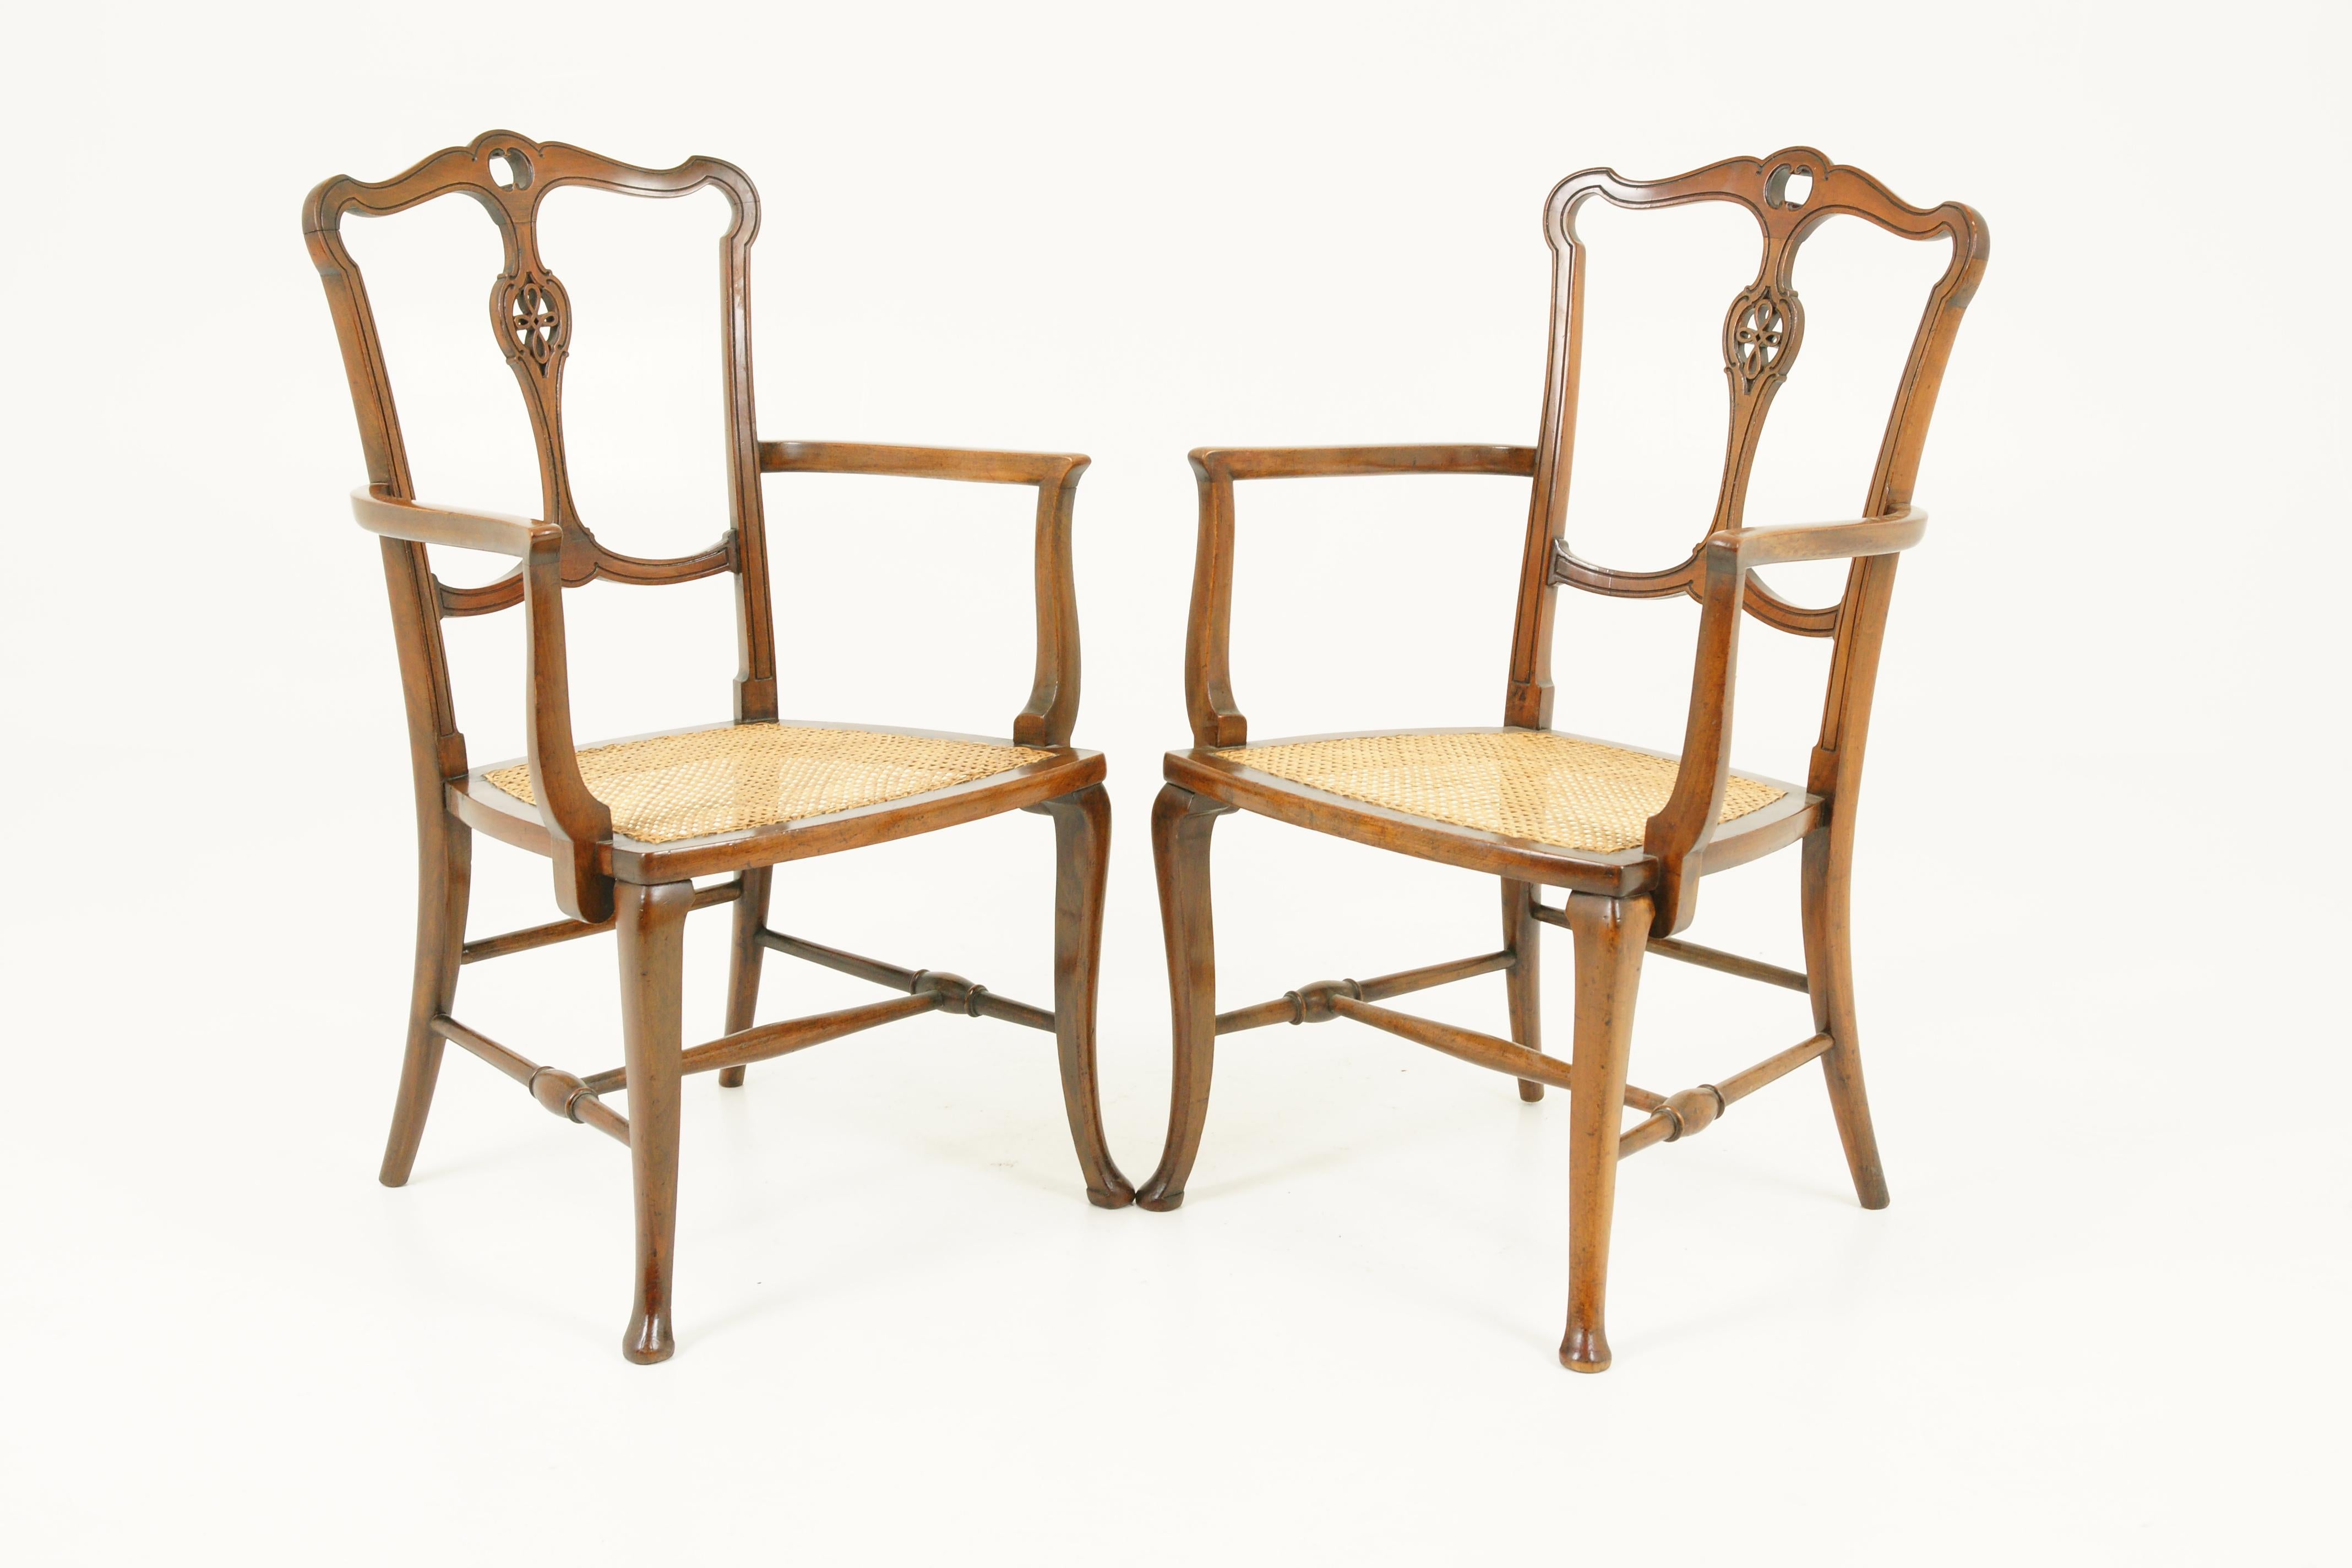 Antique Walnut Armchairs, Pair of Armchairs, Caned Seats, Scotland 1920, B1700 5